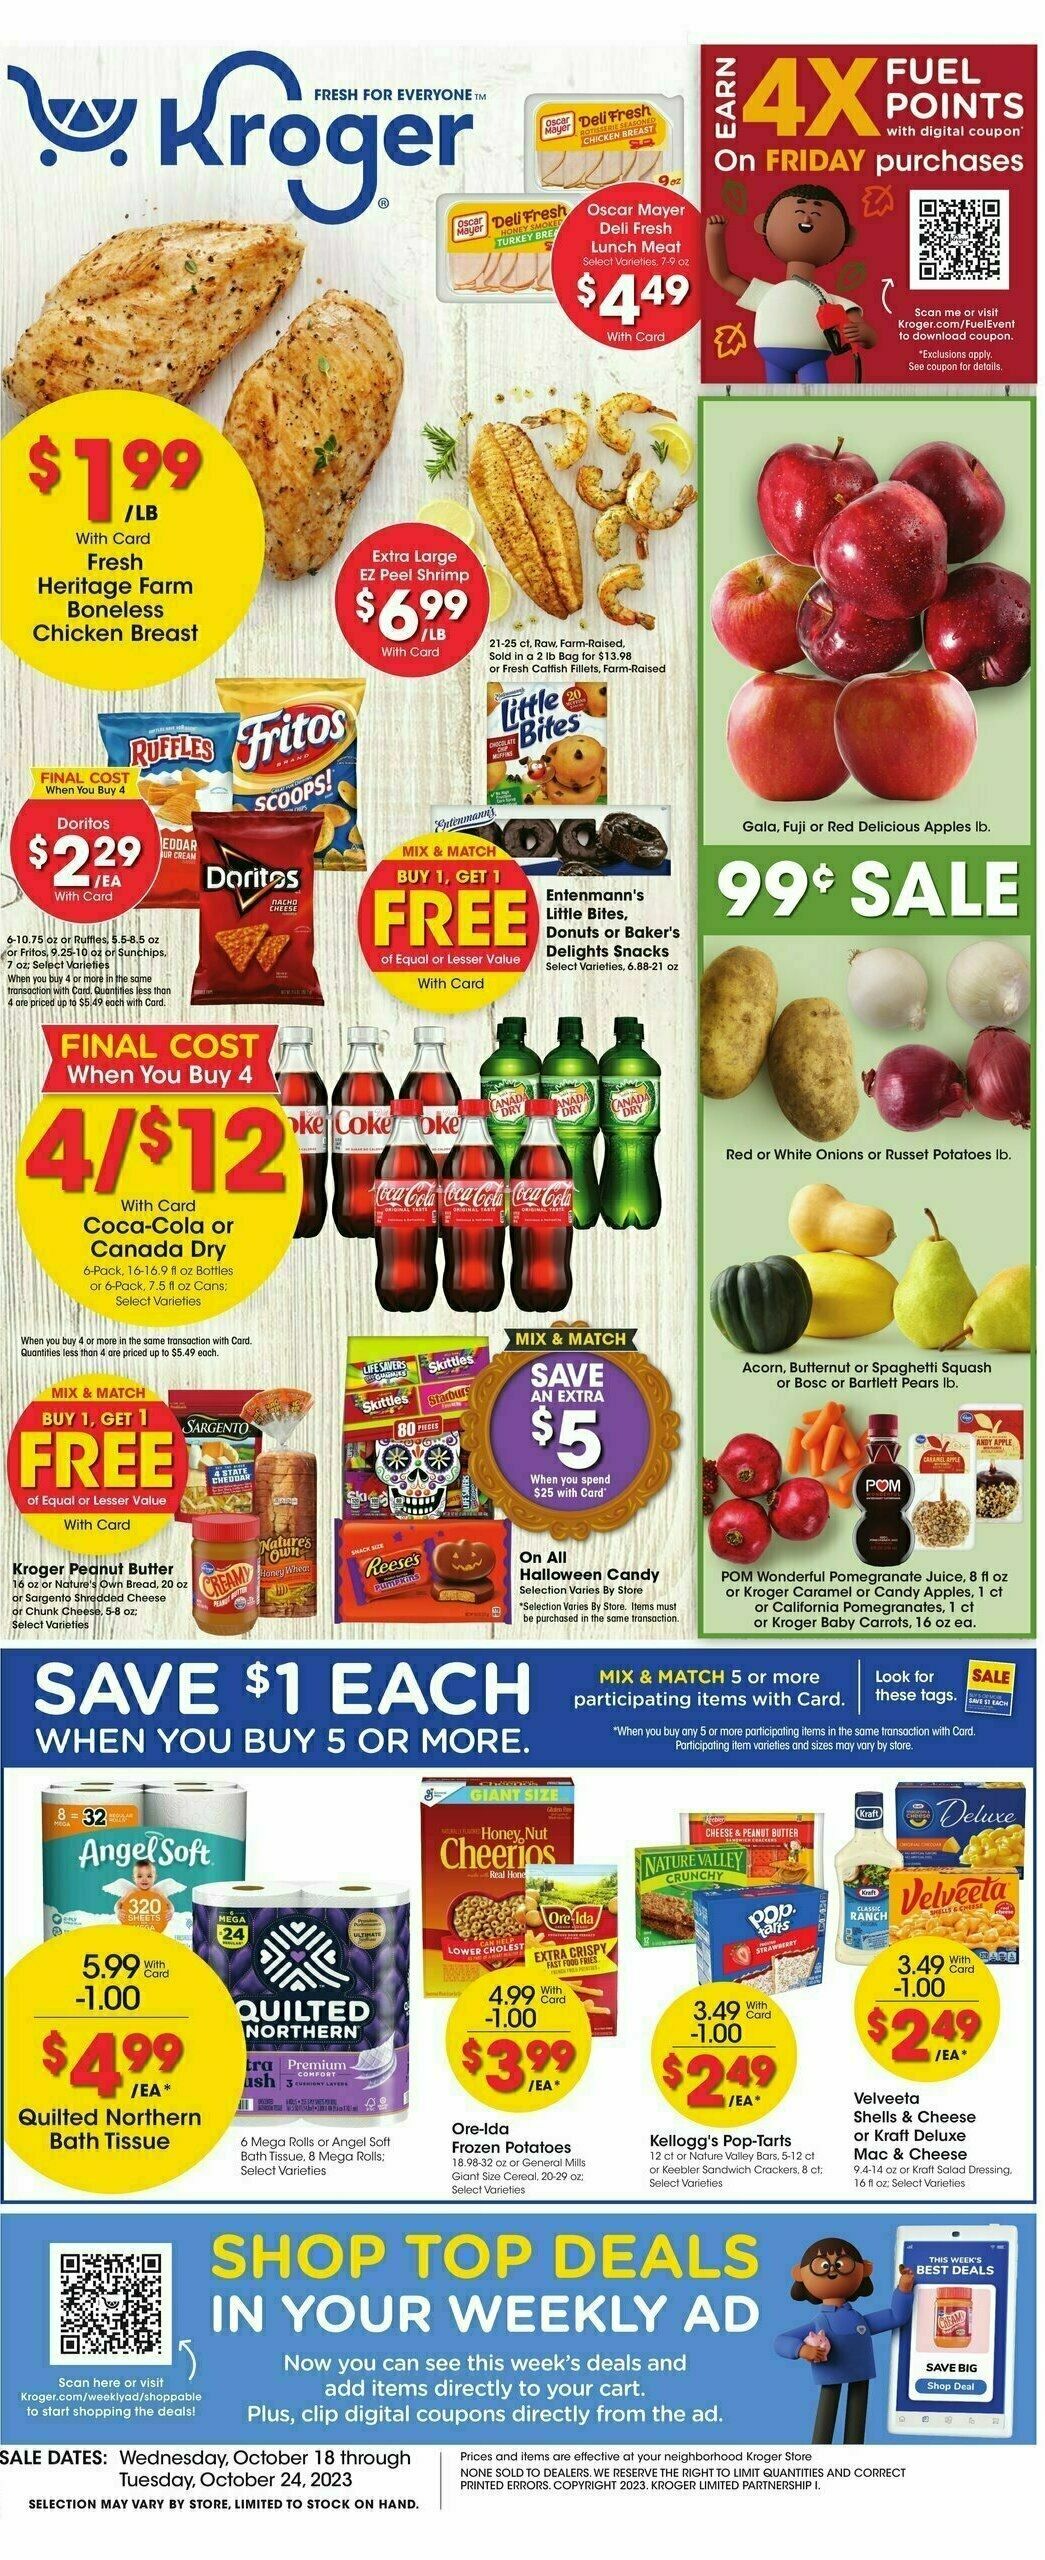 Kroger Weekly Ad from October 18